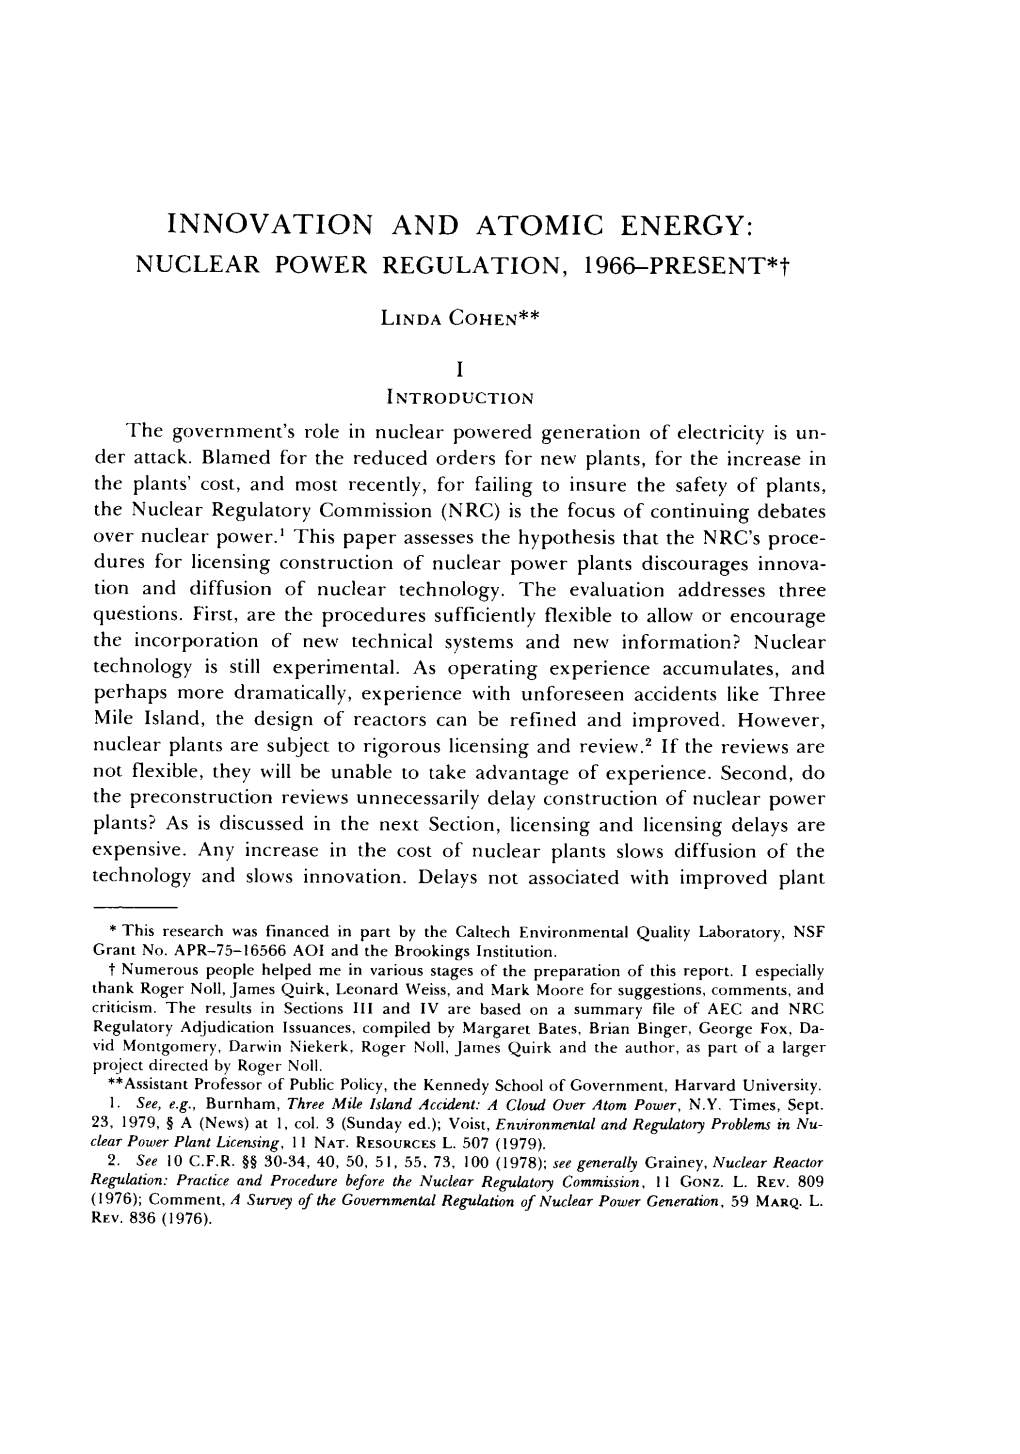 INNOVATION and ATOMIC ENERGY: NUCLEAR POWER REGULATION, 1966-PRESENT*T